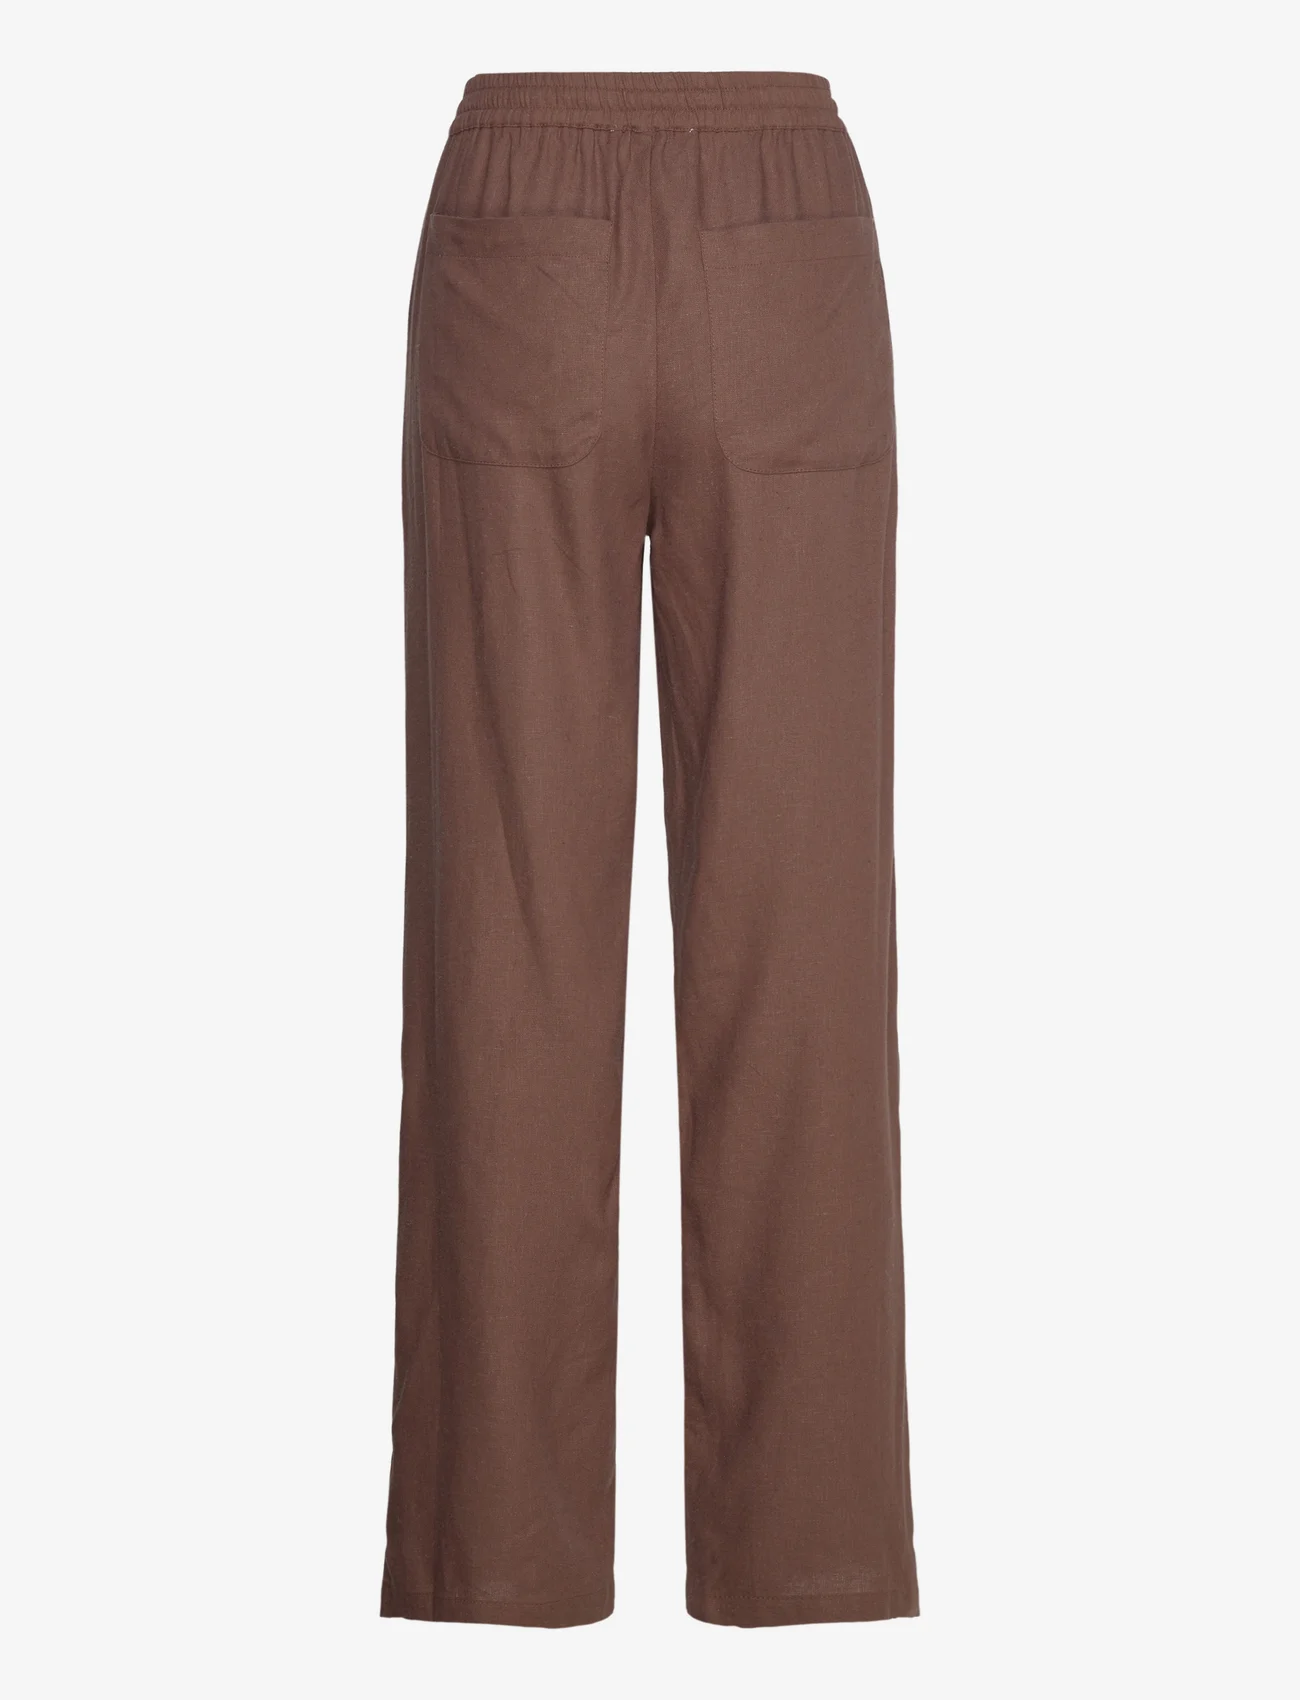 Sofie Schnoor - Trousers - linen trousers - chocolate brown - 1